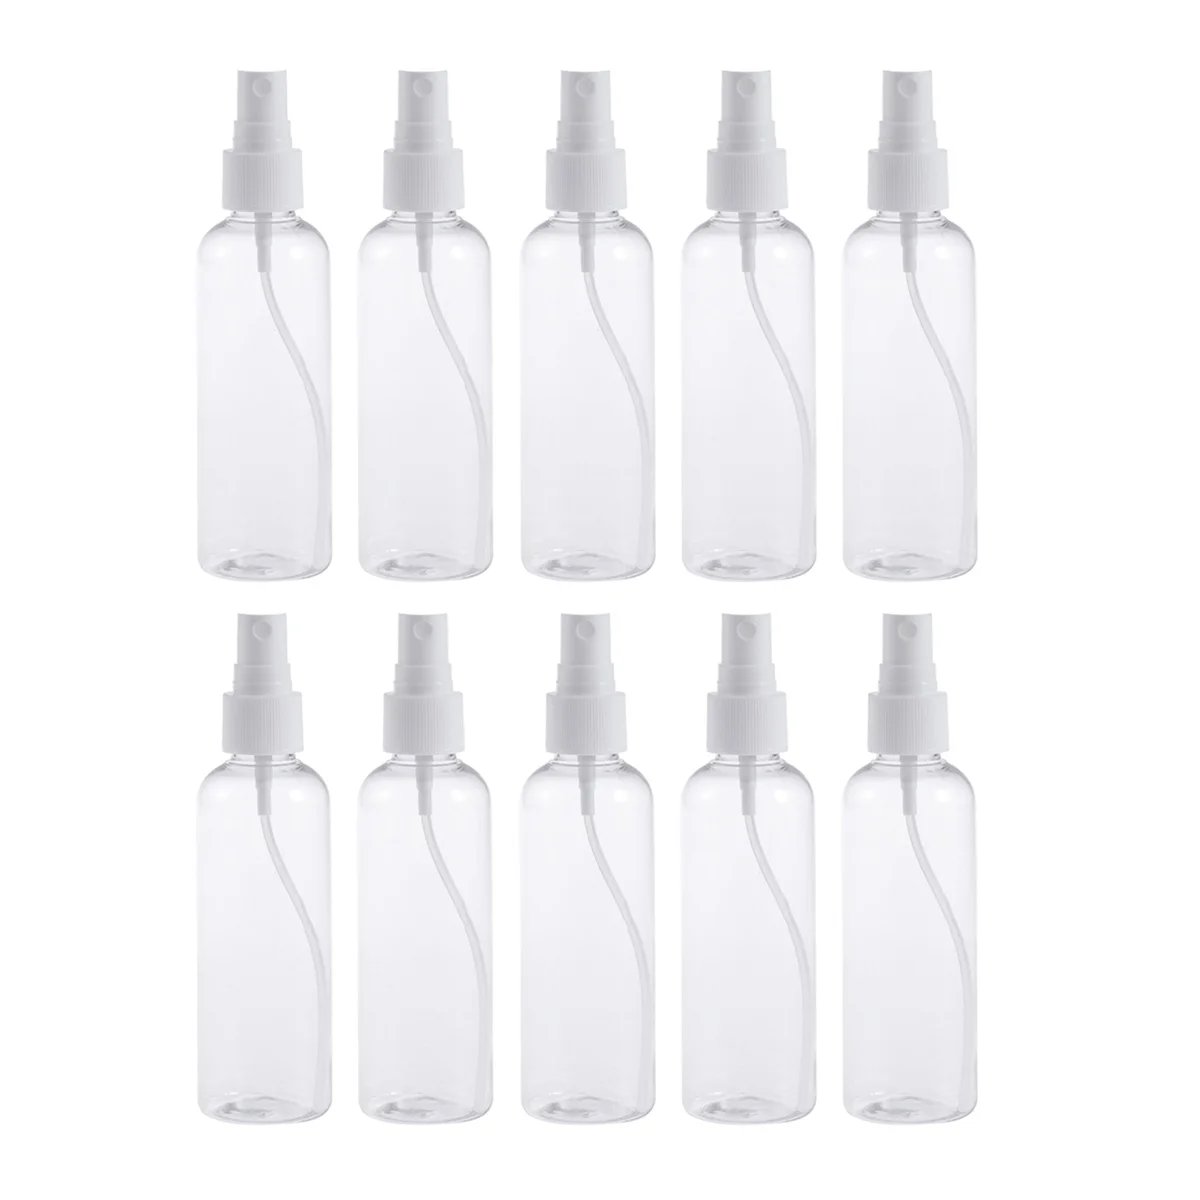 

10PCS Spray Bottle Fine Mist Clear Empty Spray Bottle for Essential Oils and Liquids, Travel Size Refillable Containers (